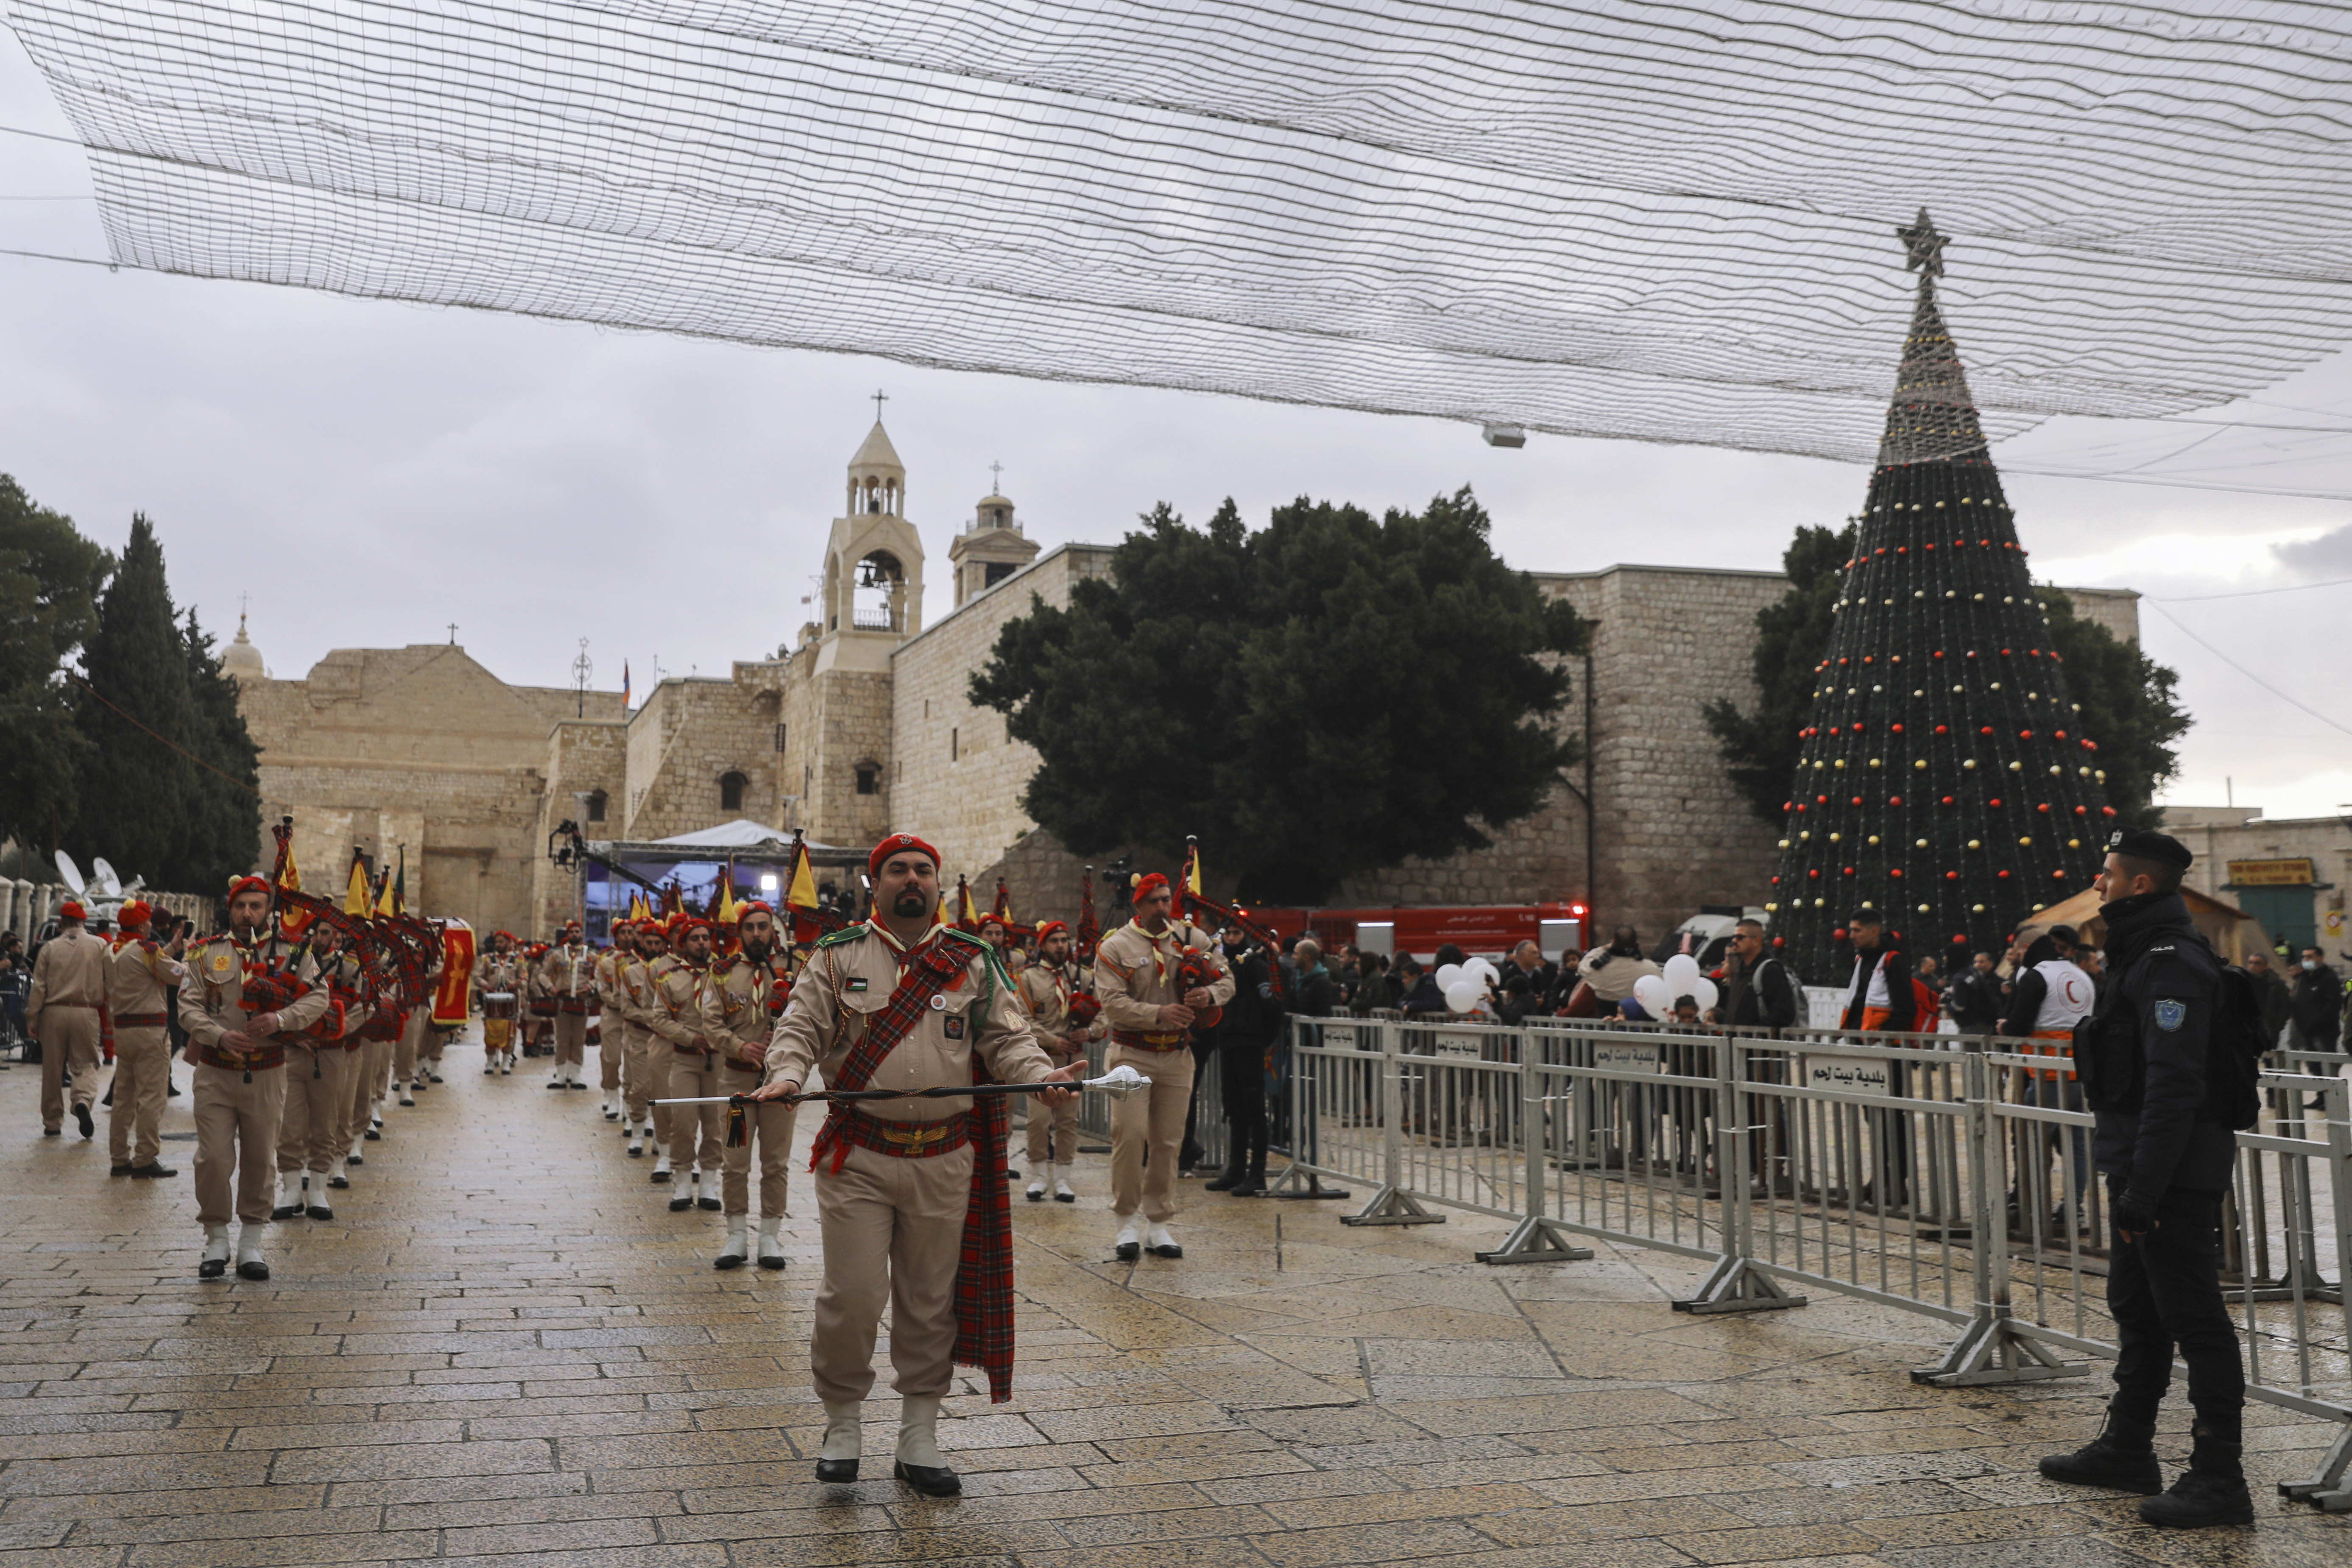 Palestinian scout bands parade through Manger Square at the Church of the Nativity,  traditionally believed to be the birthplace of Jesus Christ, during Christmas celebrations, in the West Bank city of Bethlehem, Friday, Dec. 24, 2021. 